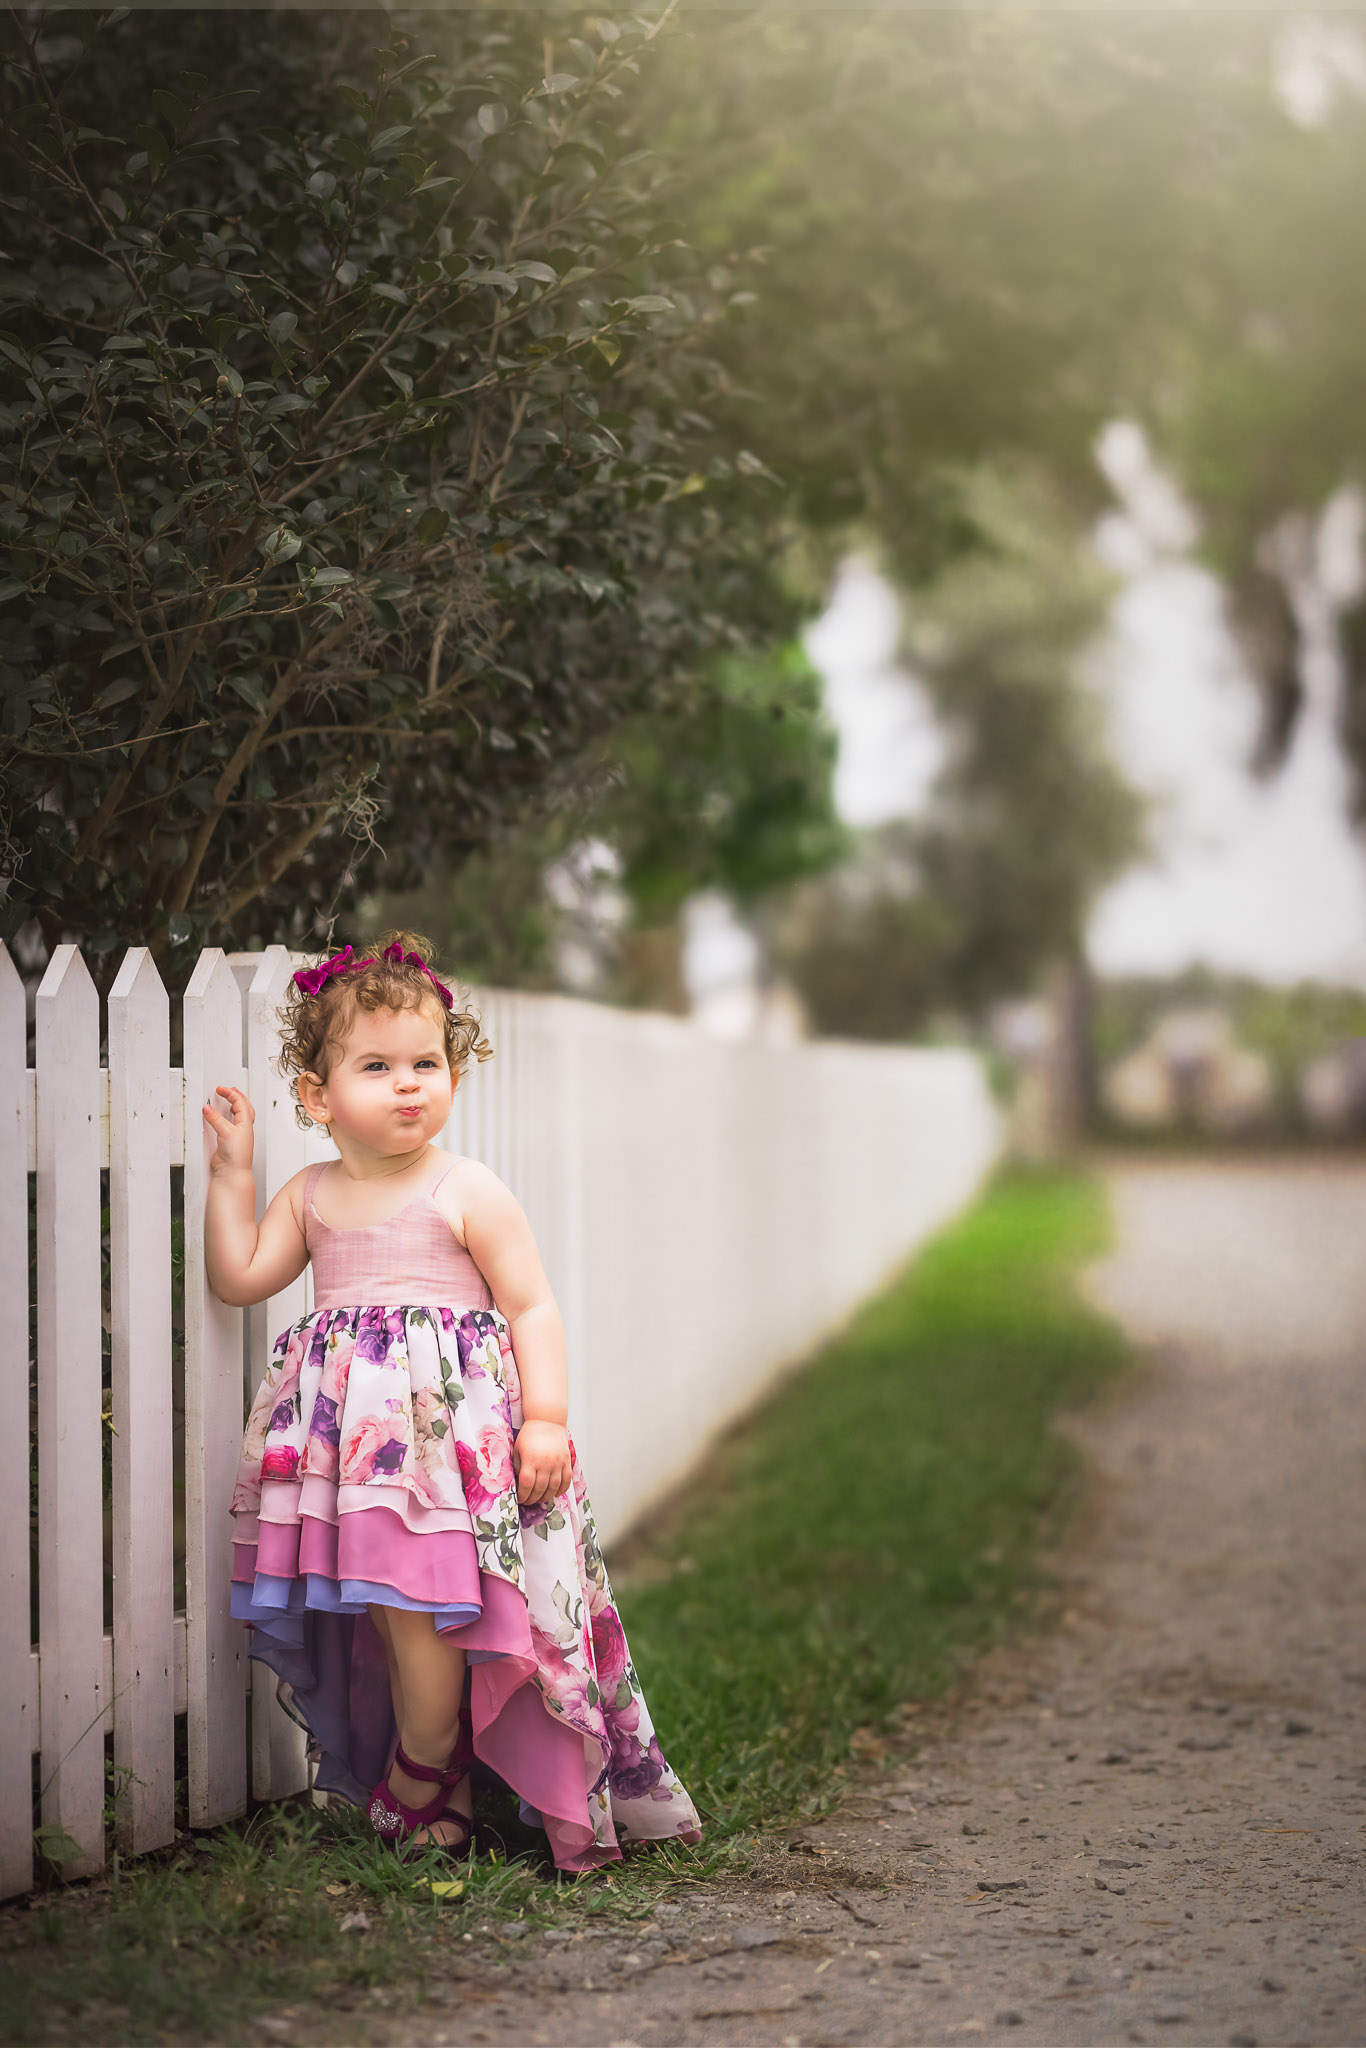 A young toddler girl in a colorful pink dress stands with a hand on a white picket fence raleigh preschools